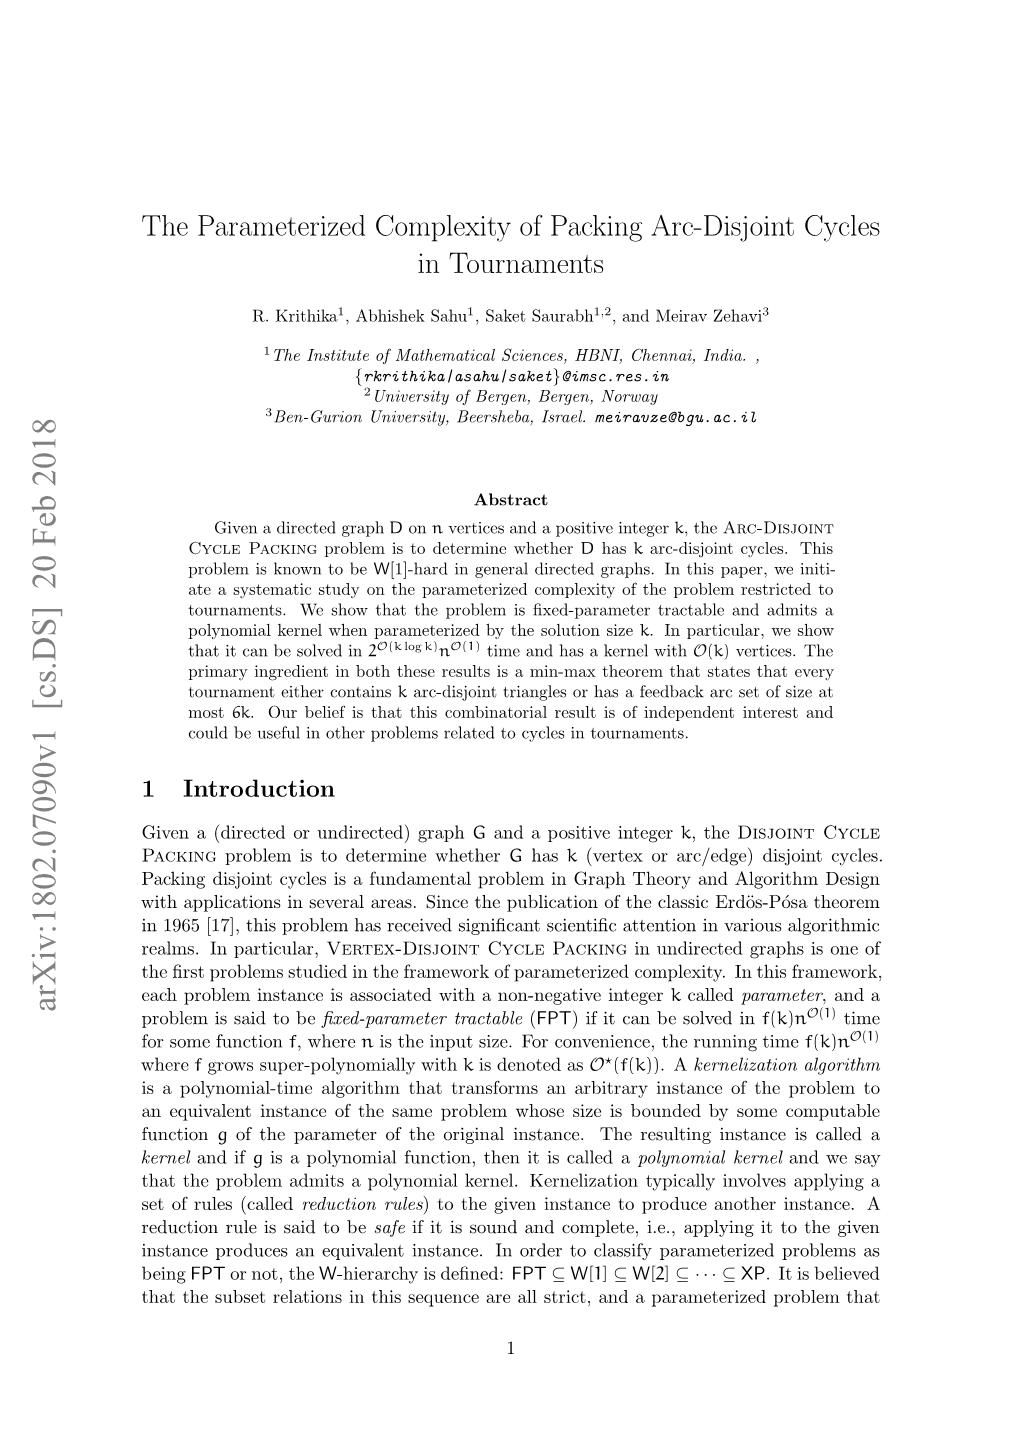 The Parameterized Complexity of Packing Arc-Disjoint Cycles